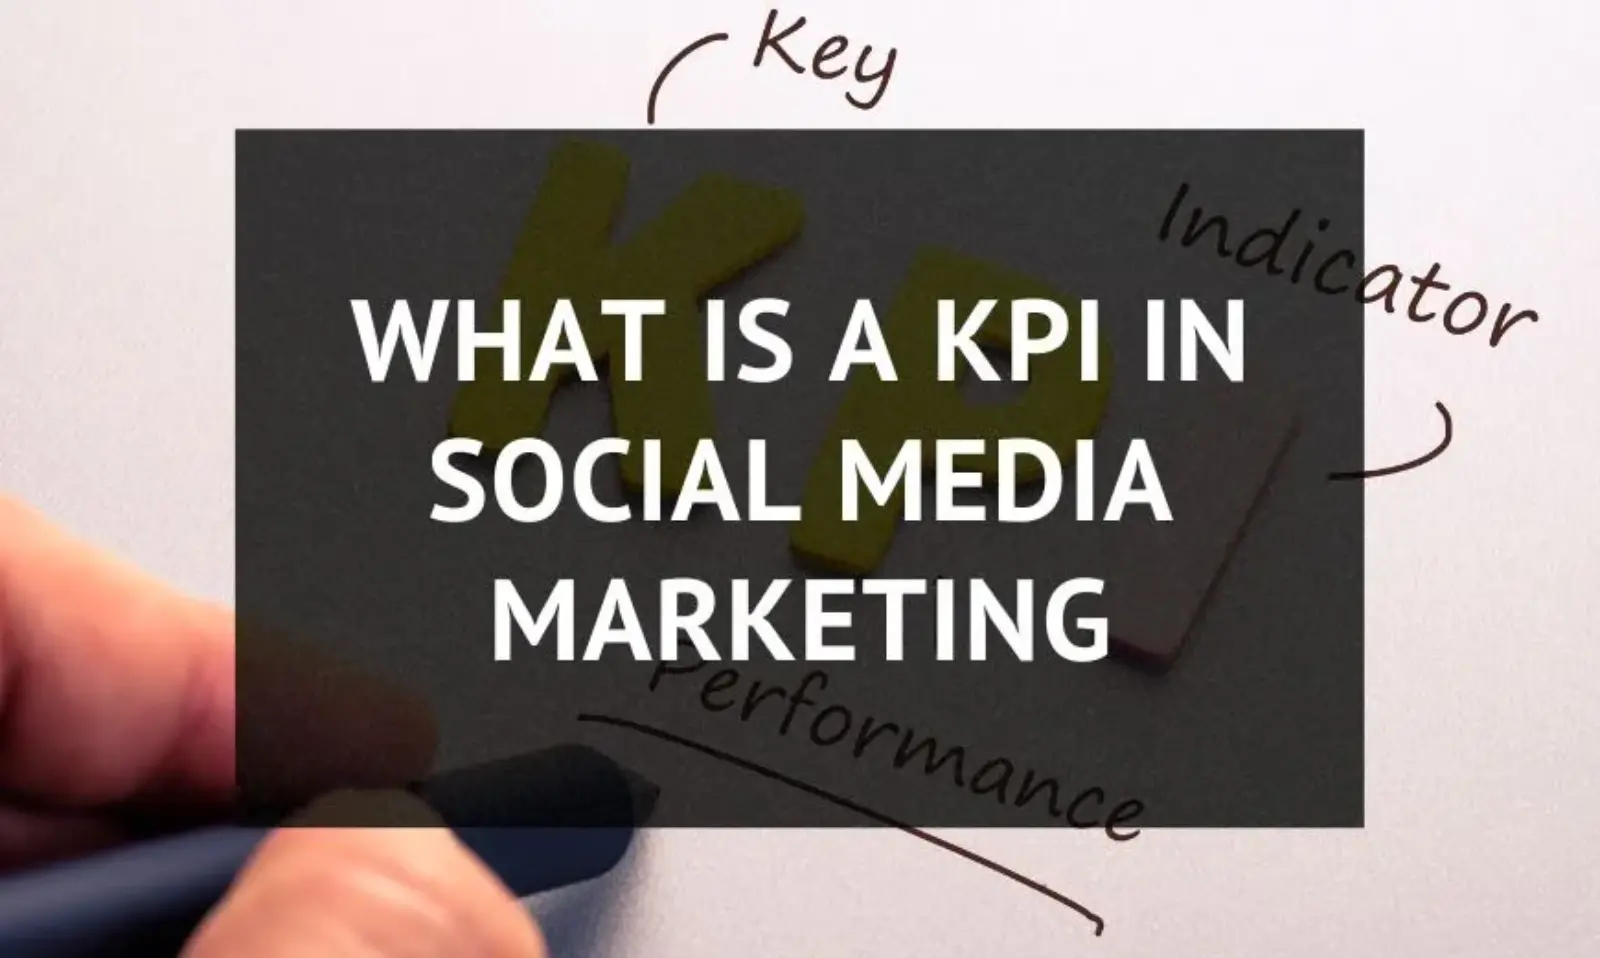 What are KPIs in social media marketing